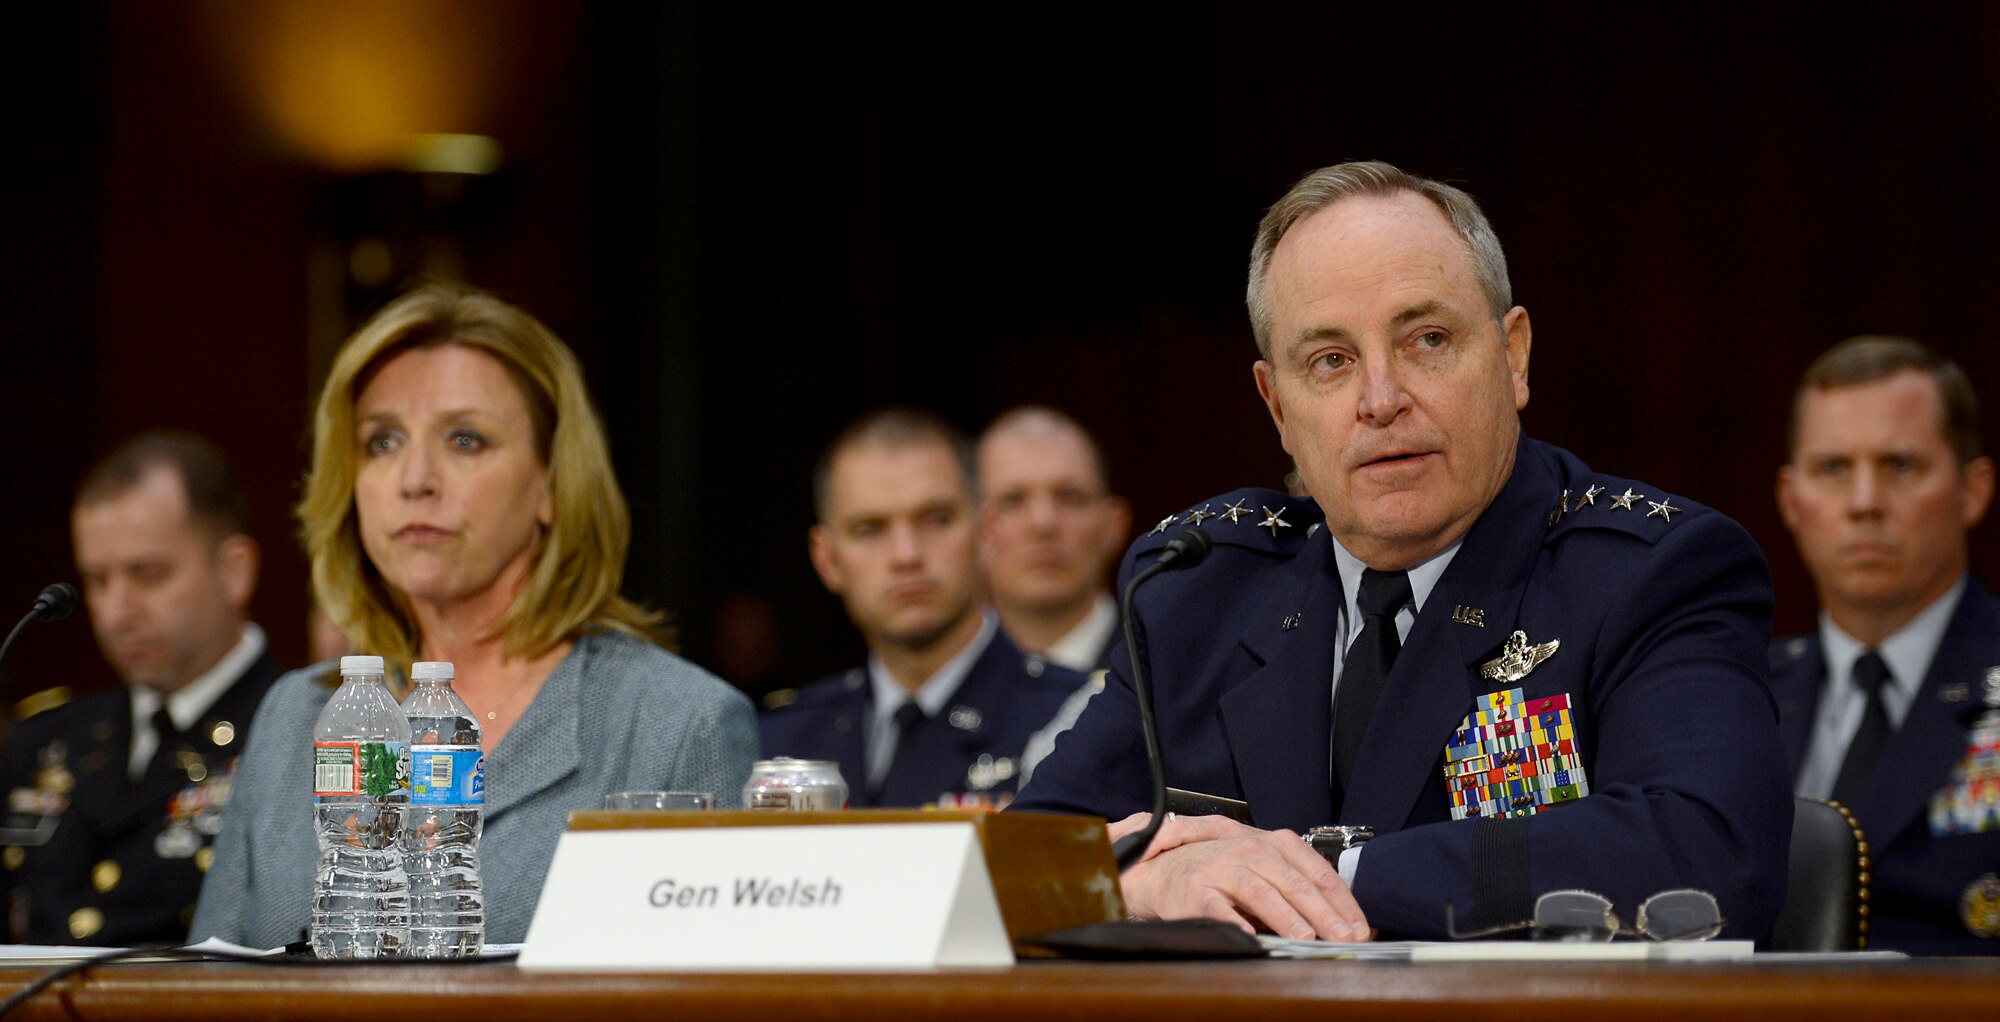 Air Force Chief of Staff Gen. Mark A. Welsh III answers a question during the Air Force Posture hearing for fiscal year 2016 before the Senate Armed Services Committee March 18, 2015, in Washington, D.C.  Welsh and Secretary of the Air Force Deborah Lee James delivered their budget proposal alongside the Army with Secretary of the Army John M. McHugh and Chief of Staff of the Army Gen. Raymond T. "Ray" Odierno.  (U.S. Air Force photo/Scott M. Ash)